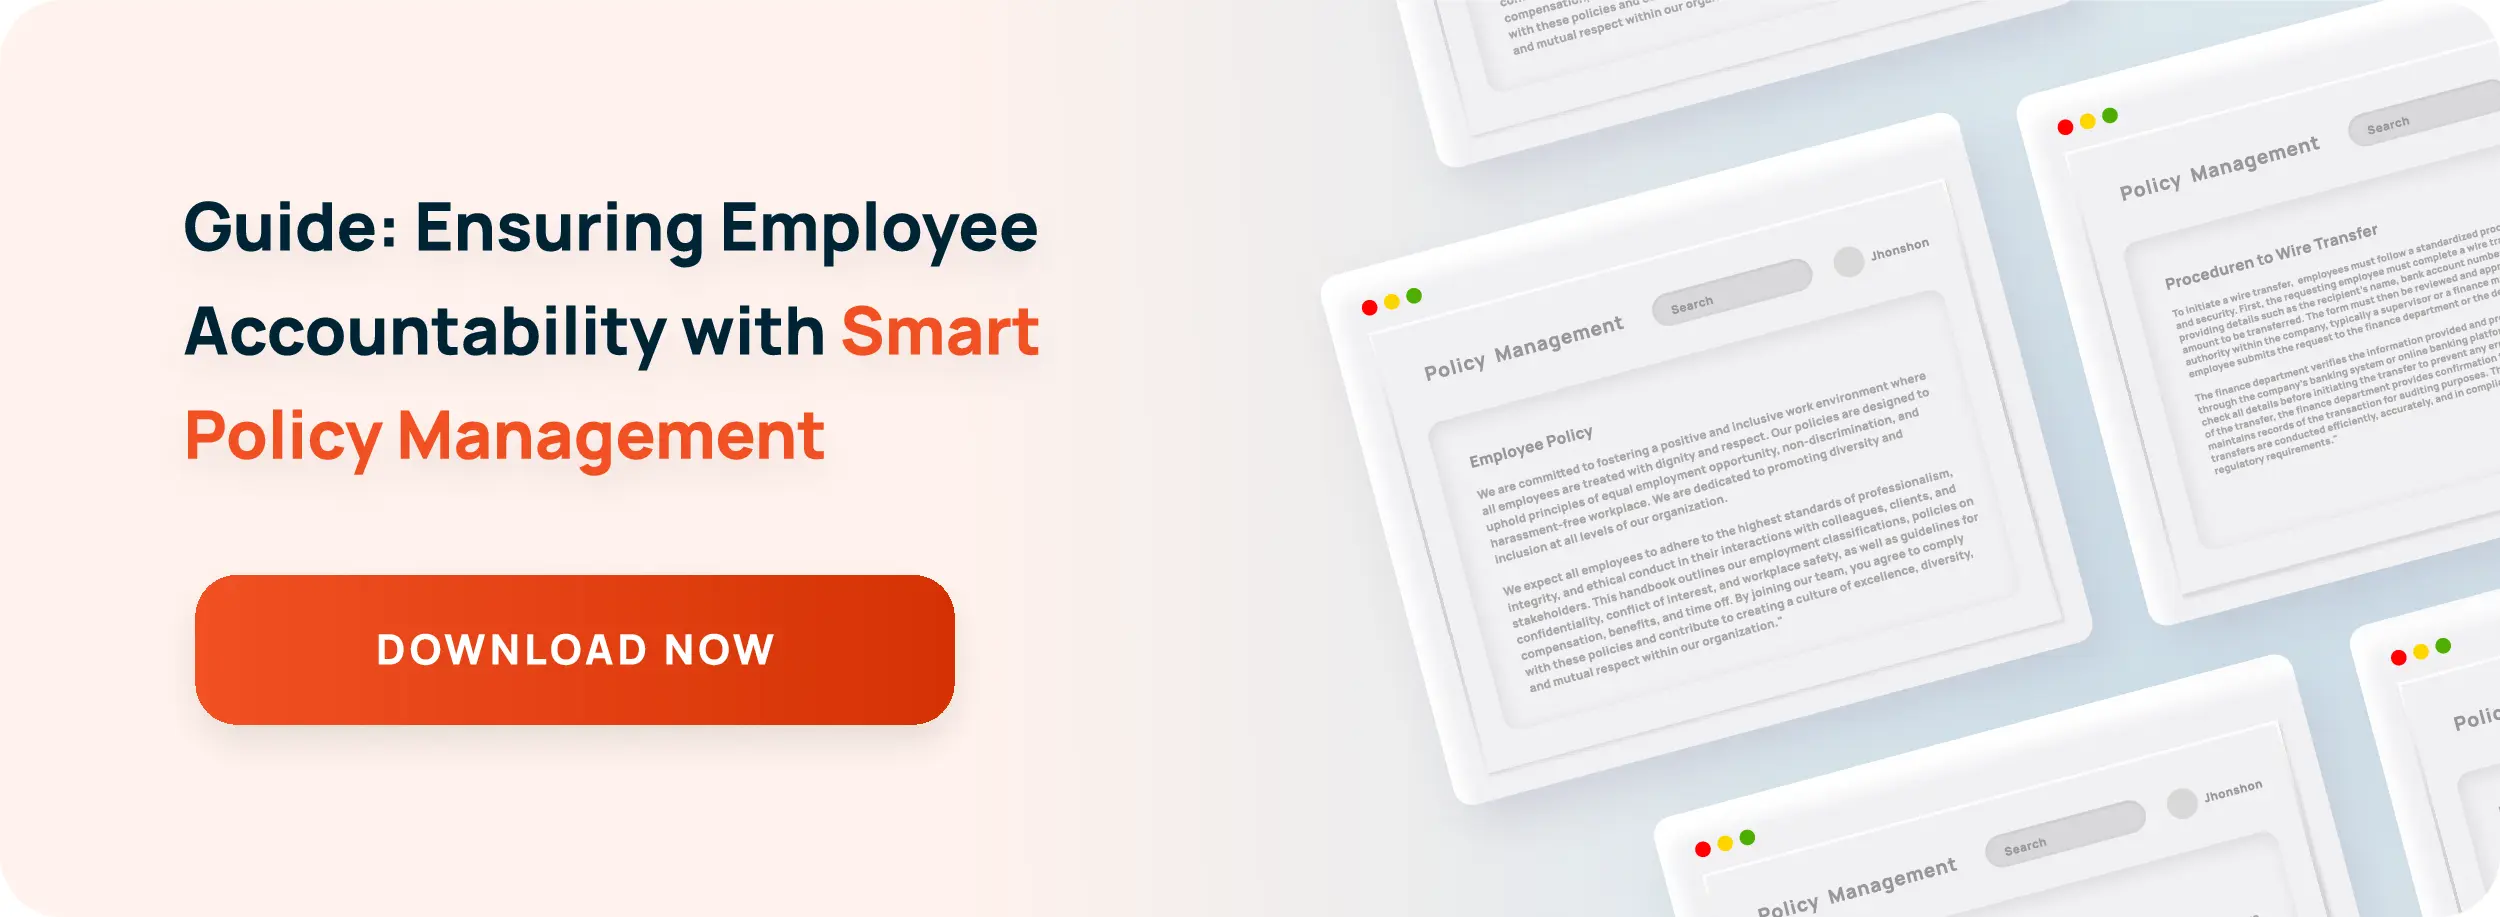 Guide: Ensuring Employee Accountability with Smart Policy Management